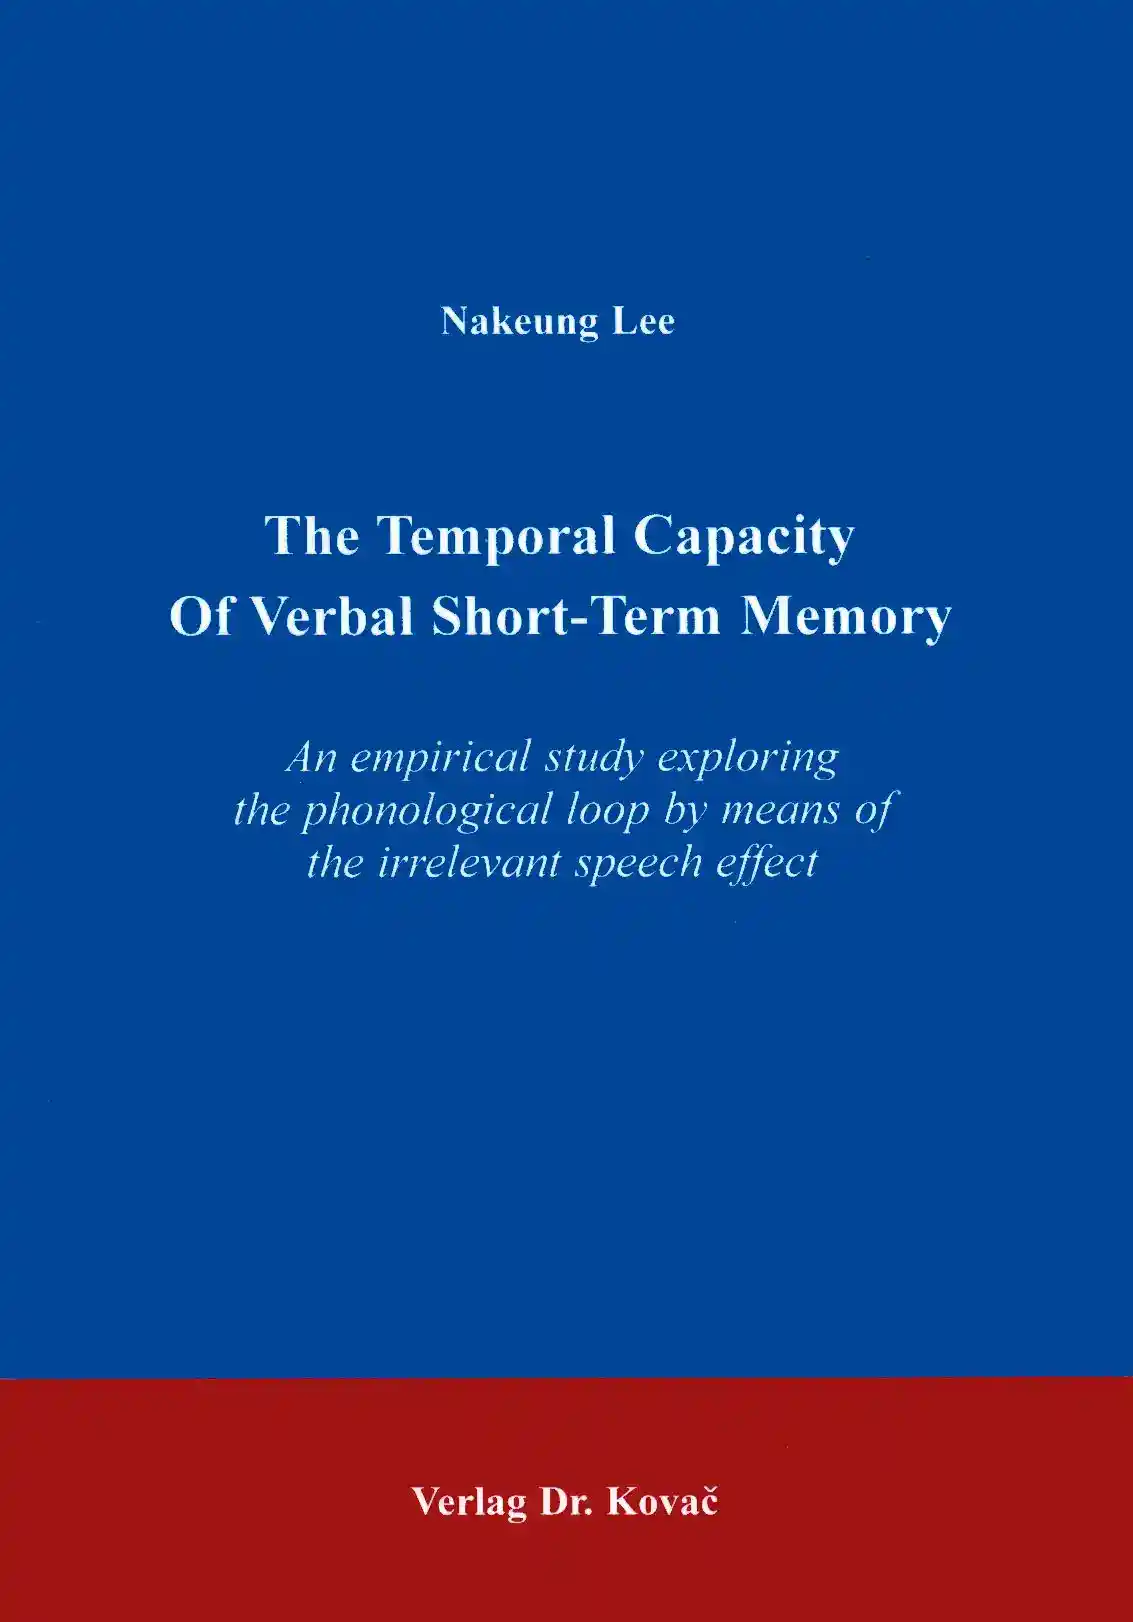 Cover: The temporal capacity of verbal short-term memory